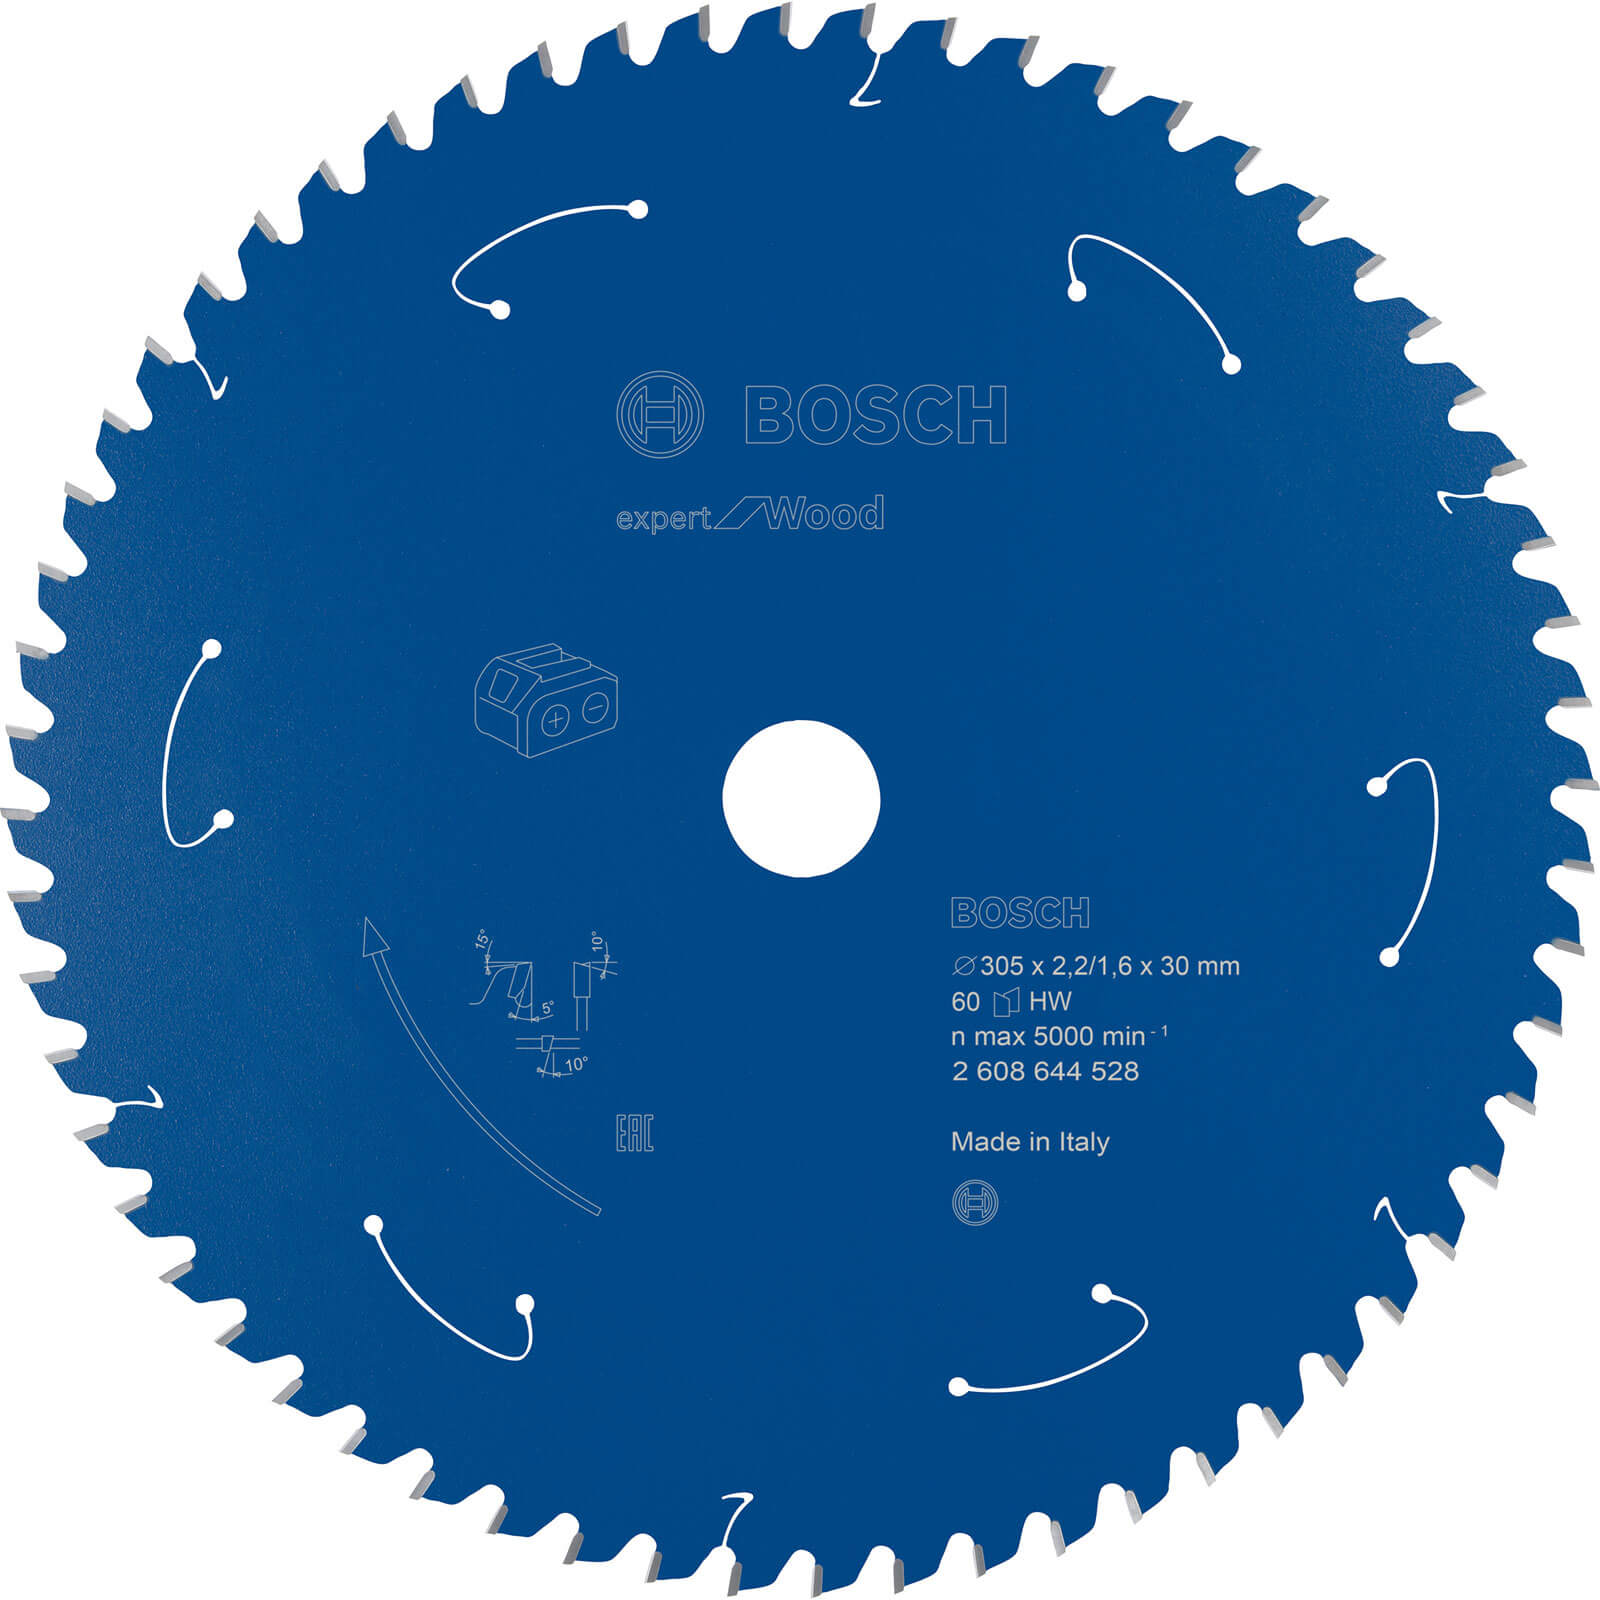 Image of Bosch Expert Wood Cutting Cordless Mitre Saw Blade 305mm 60T 30mm